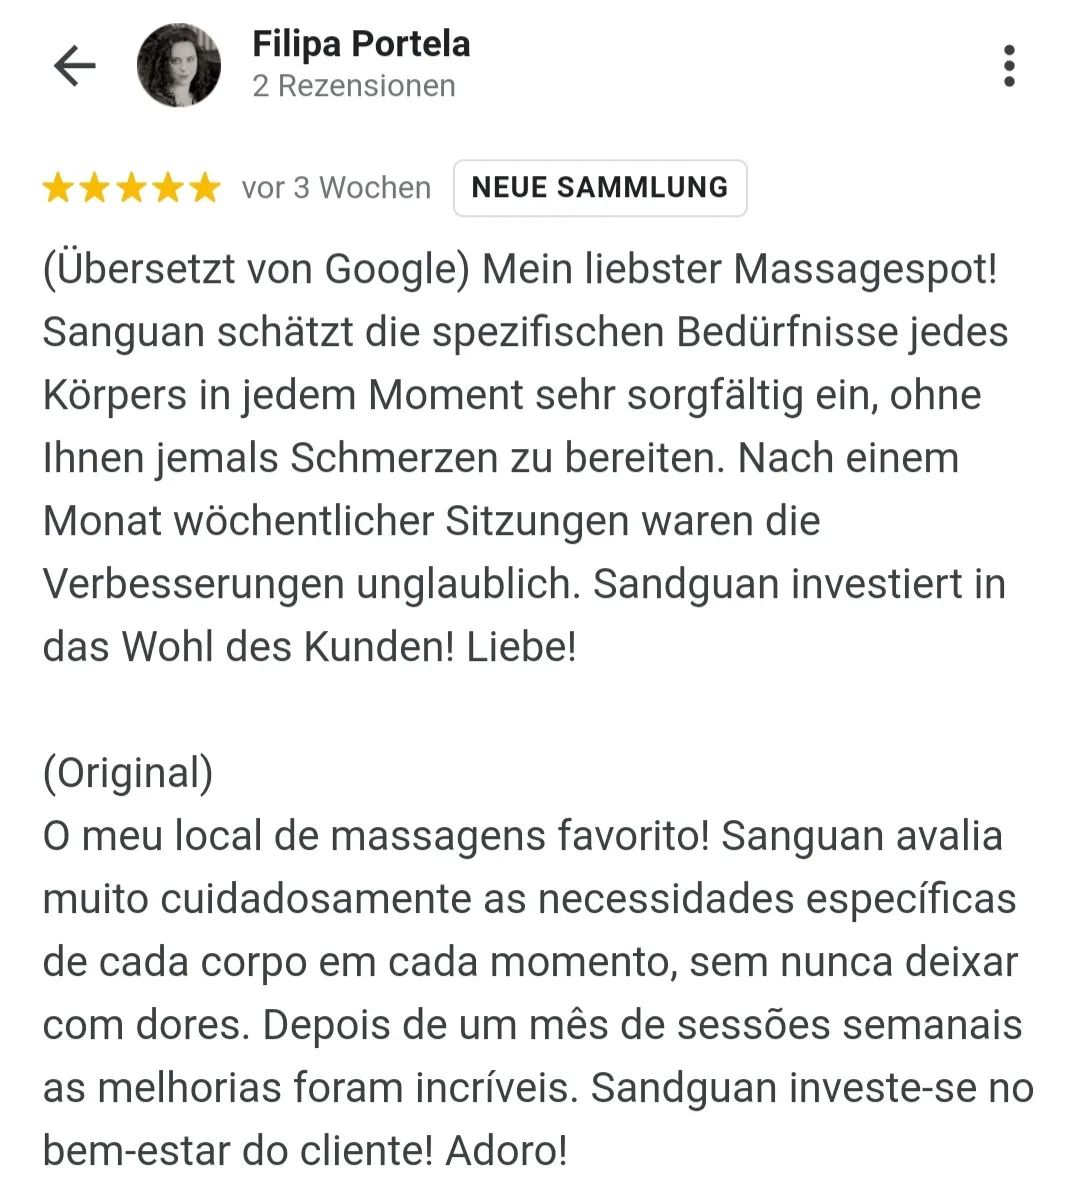 Thank you very much for your great feedback and the 5 star rating!
I am pleased that you enjoyed the massage treatment with me. I wish you all the best and hope to welcome you back to ThaiMoonSpa Massage soon!

Thaimoonspa Massage Leipzig 🌙🌠
🌐 www.thaimoonspa.de 📧 info@thaimoonspa.de 
☎️ Telefon 0174 9991801

#thaimoonspaleipzig #thaimassage #aromatherapy #thaimedizinmassage #massage #gutschein #geschenke #gesundheit #entspannung #relax #leipzigcity #leipzigleben #leipziggirl #leipzigartig #leipziglove #leipzig #leipzigzentrum #thailand🇹🇭 #deutschland🇩🇪